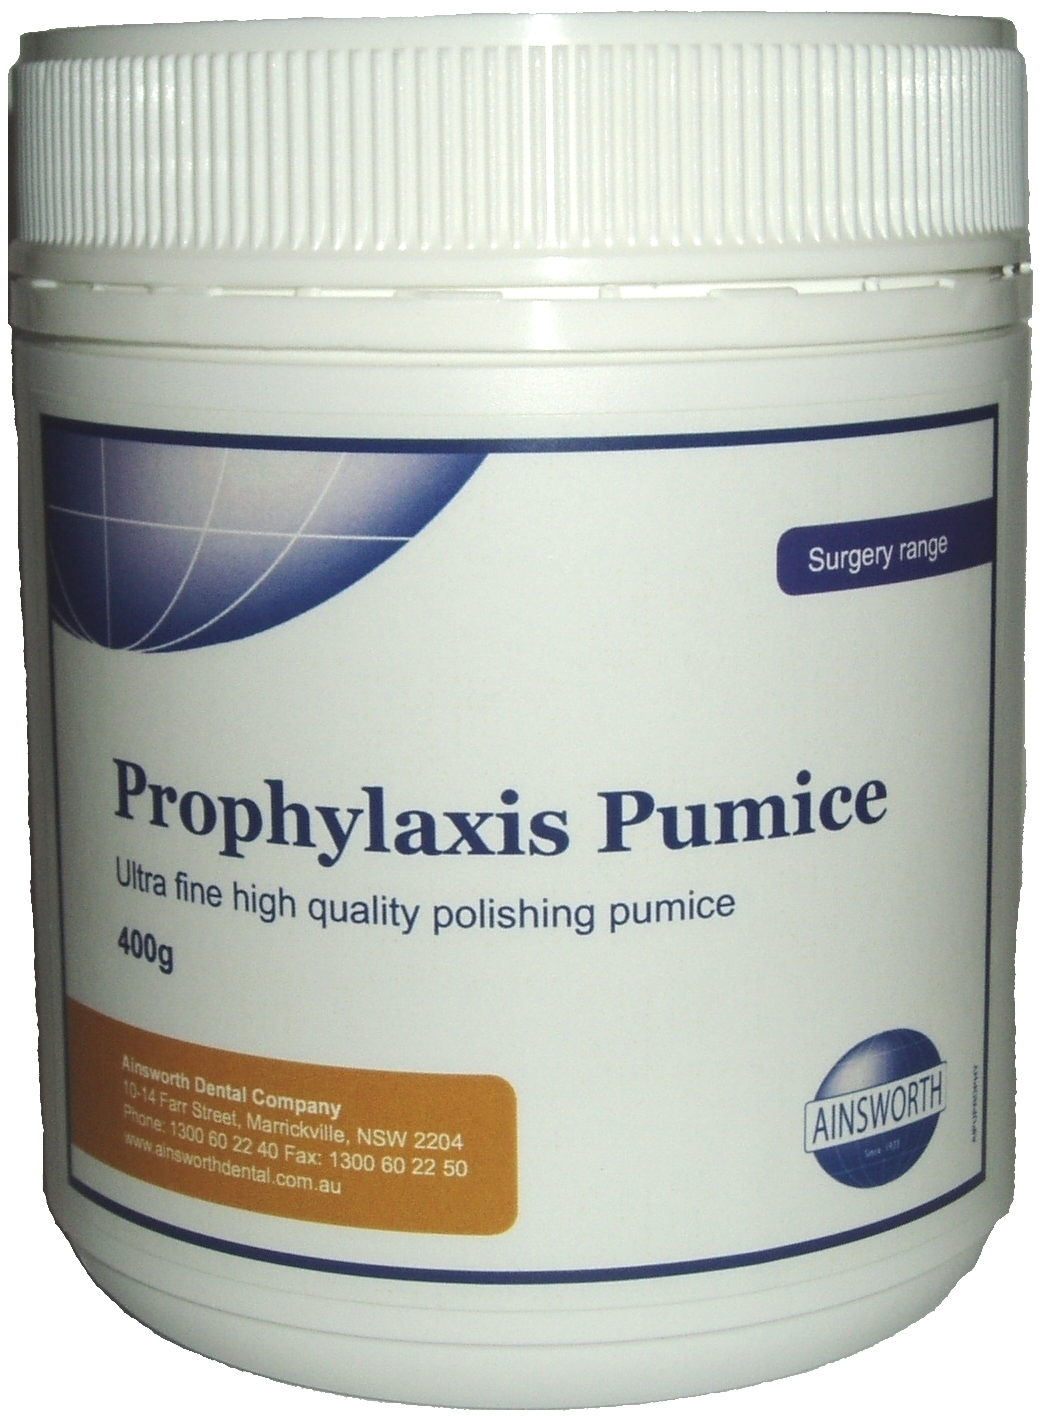 Ainsworth Prophylaxis Pumice 400G